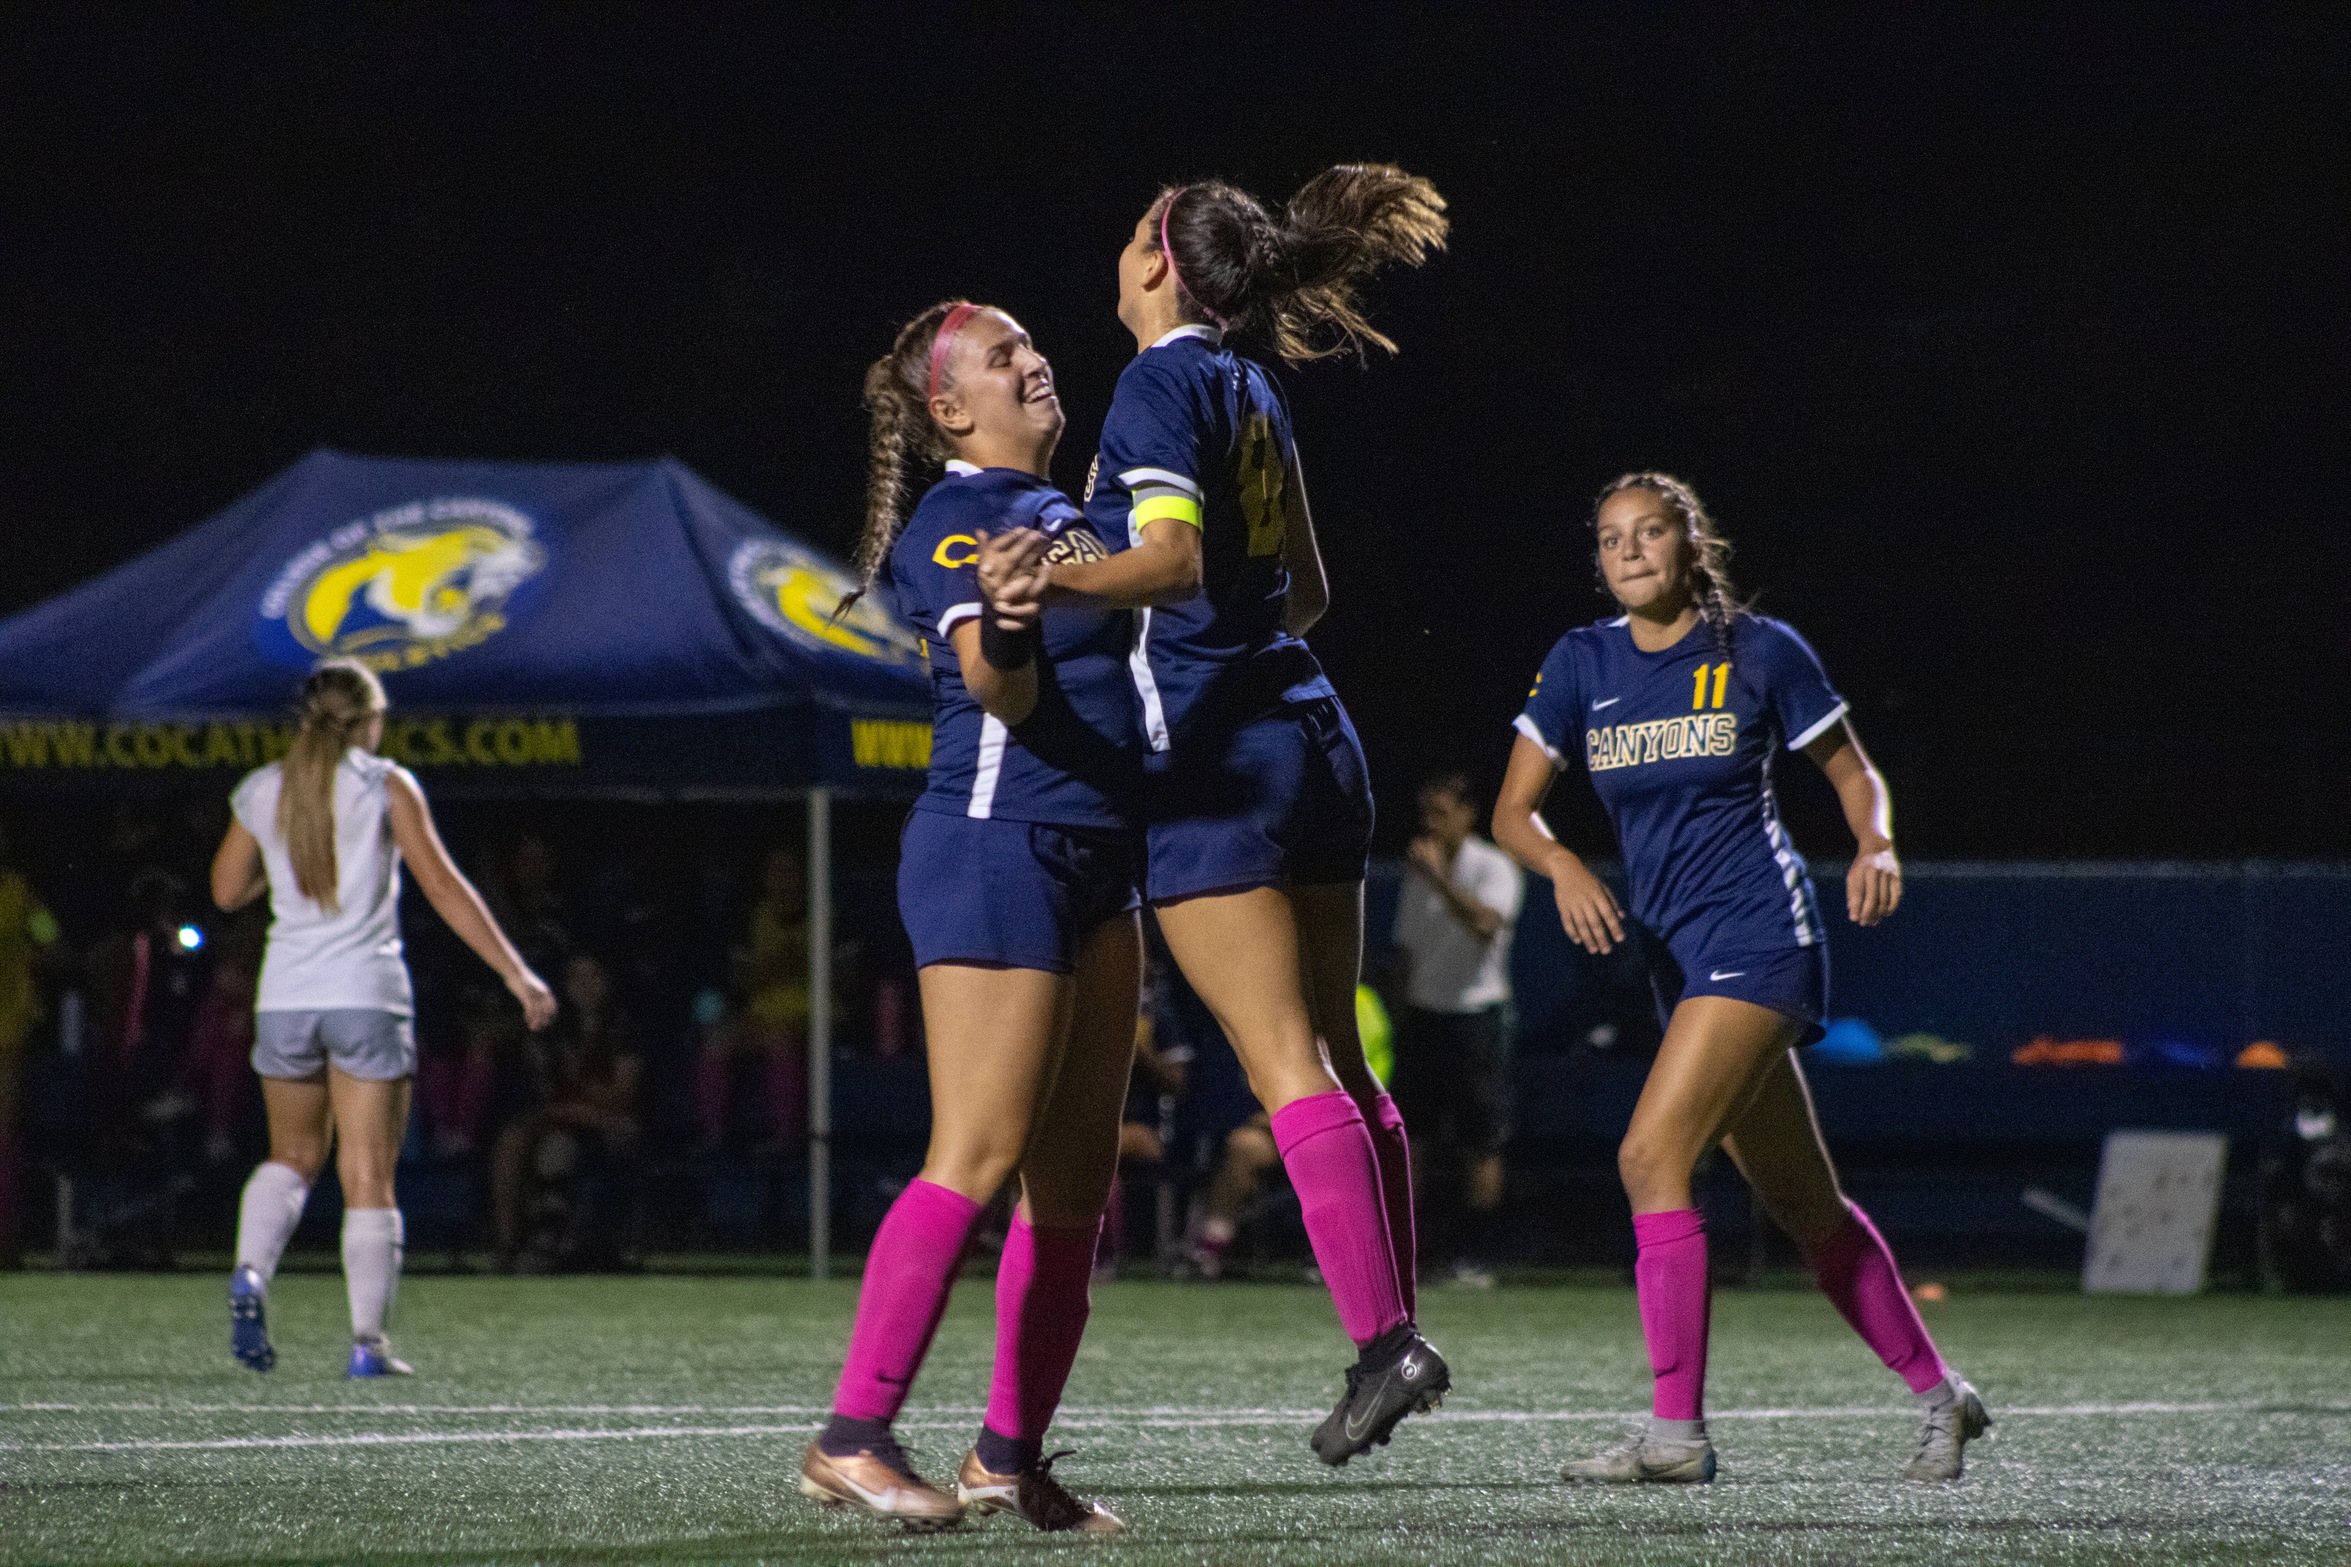 College of the Canyons received a pair of goals from freshman Alyssa Edwards (pictured right) to help down Bakersfield College 5-2 at the COC Soccer Facility on Friday. —Carla Sophia Velasco/COC Sports Information